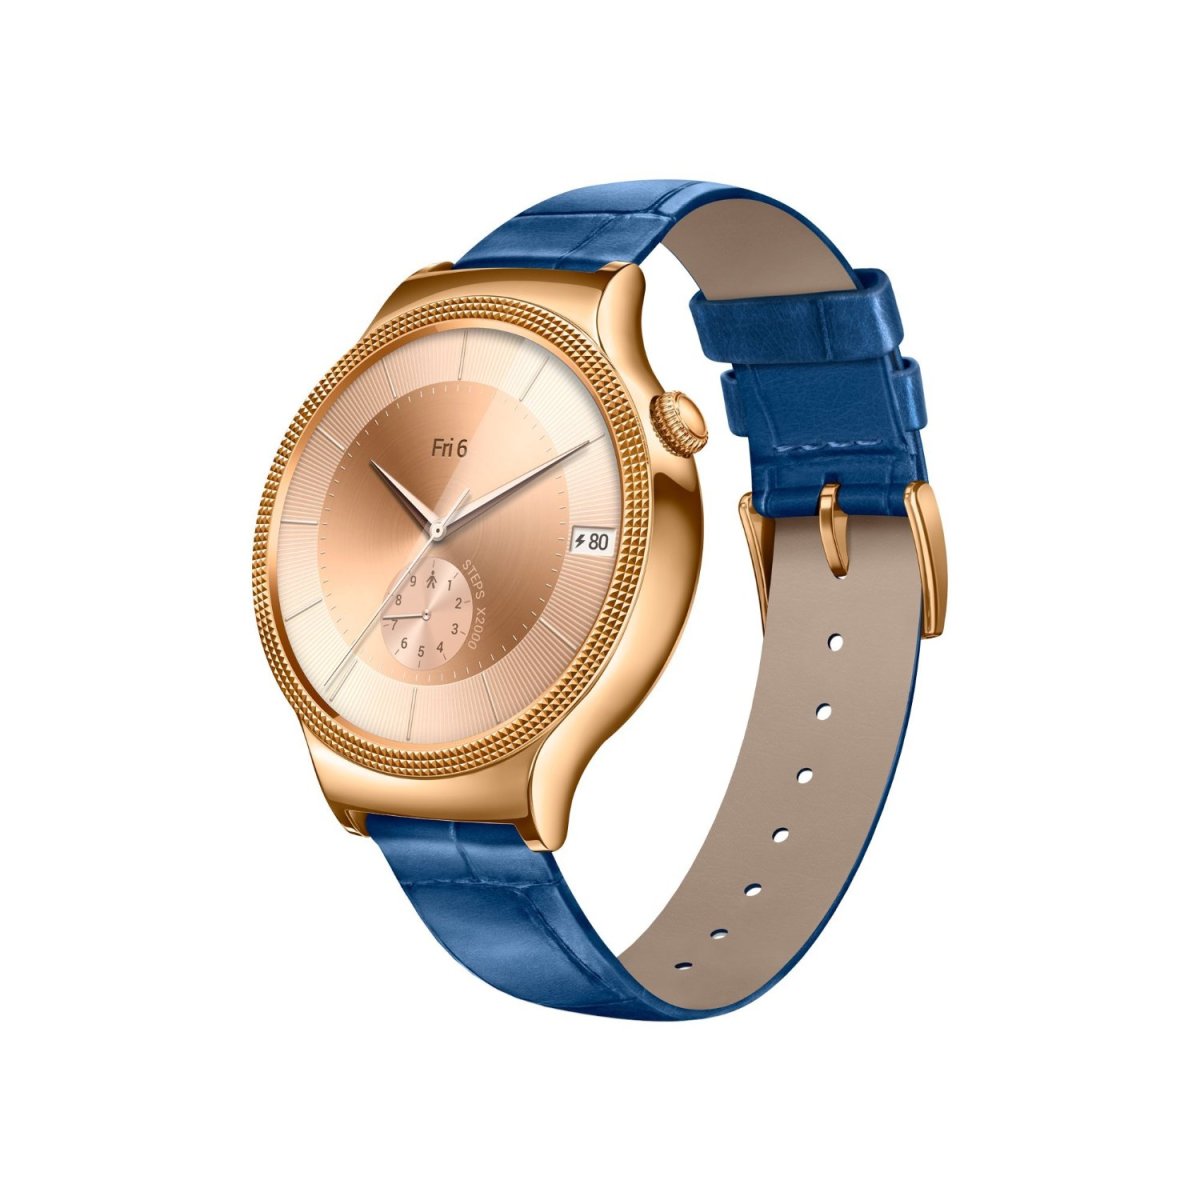 Huawei Smartwatch for iPhone, Android Smartphones | Deals Of the Day